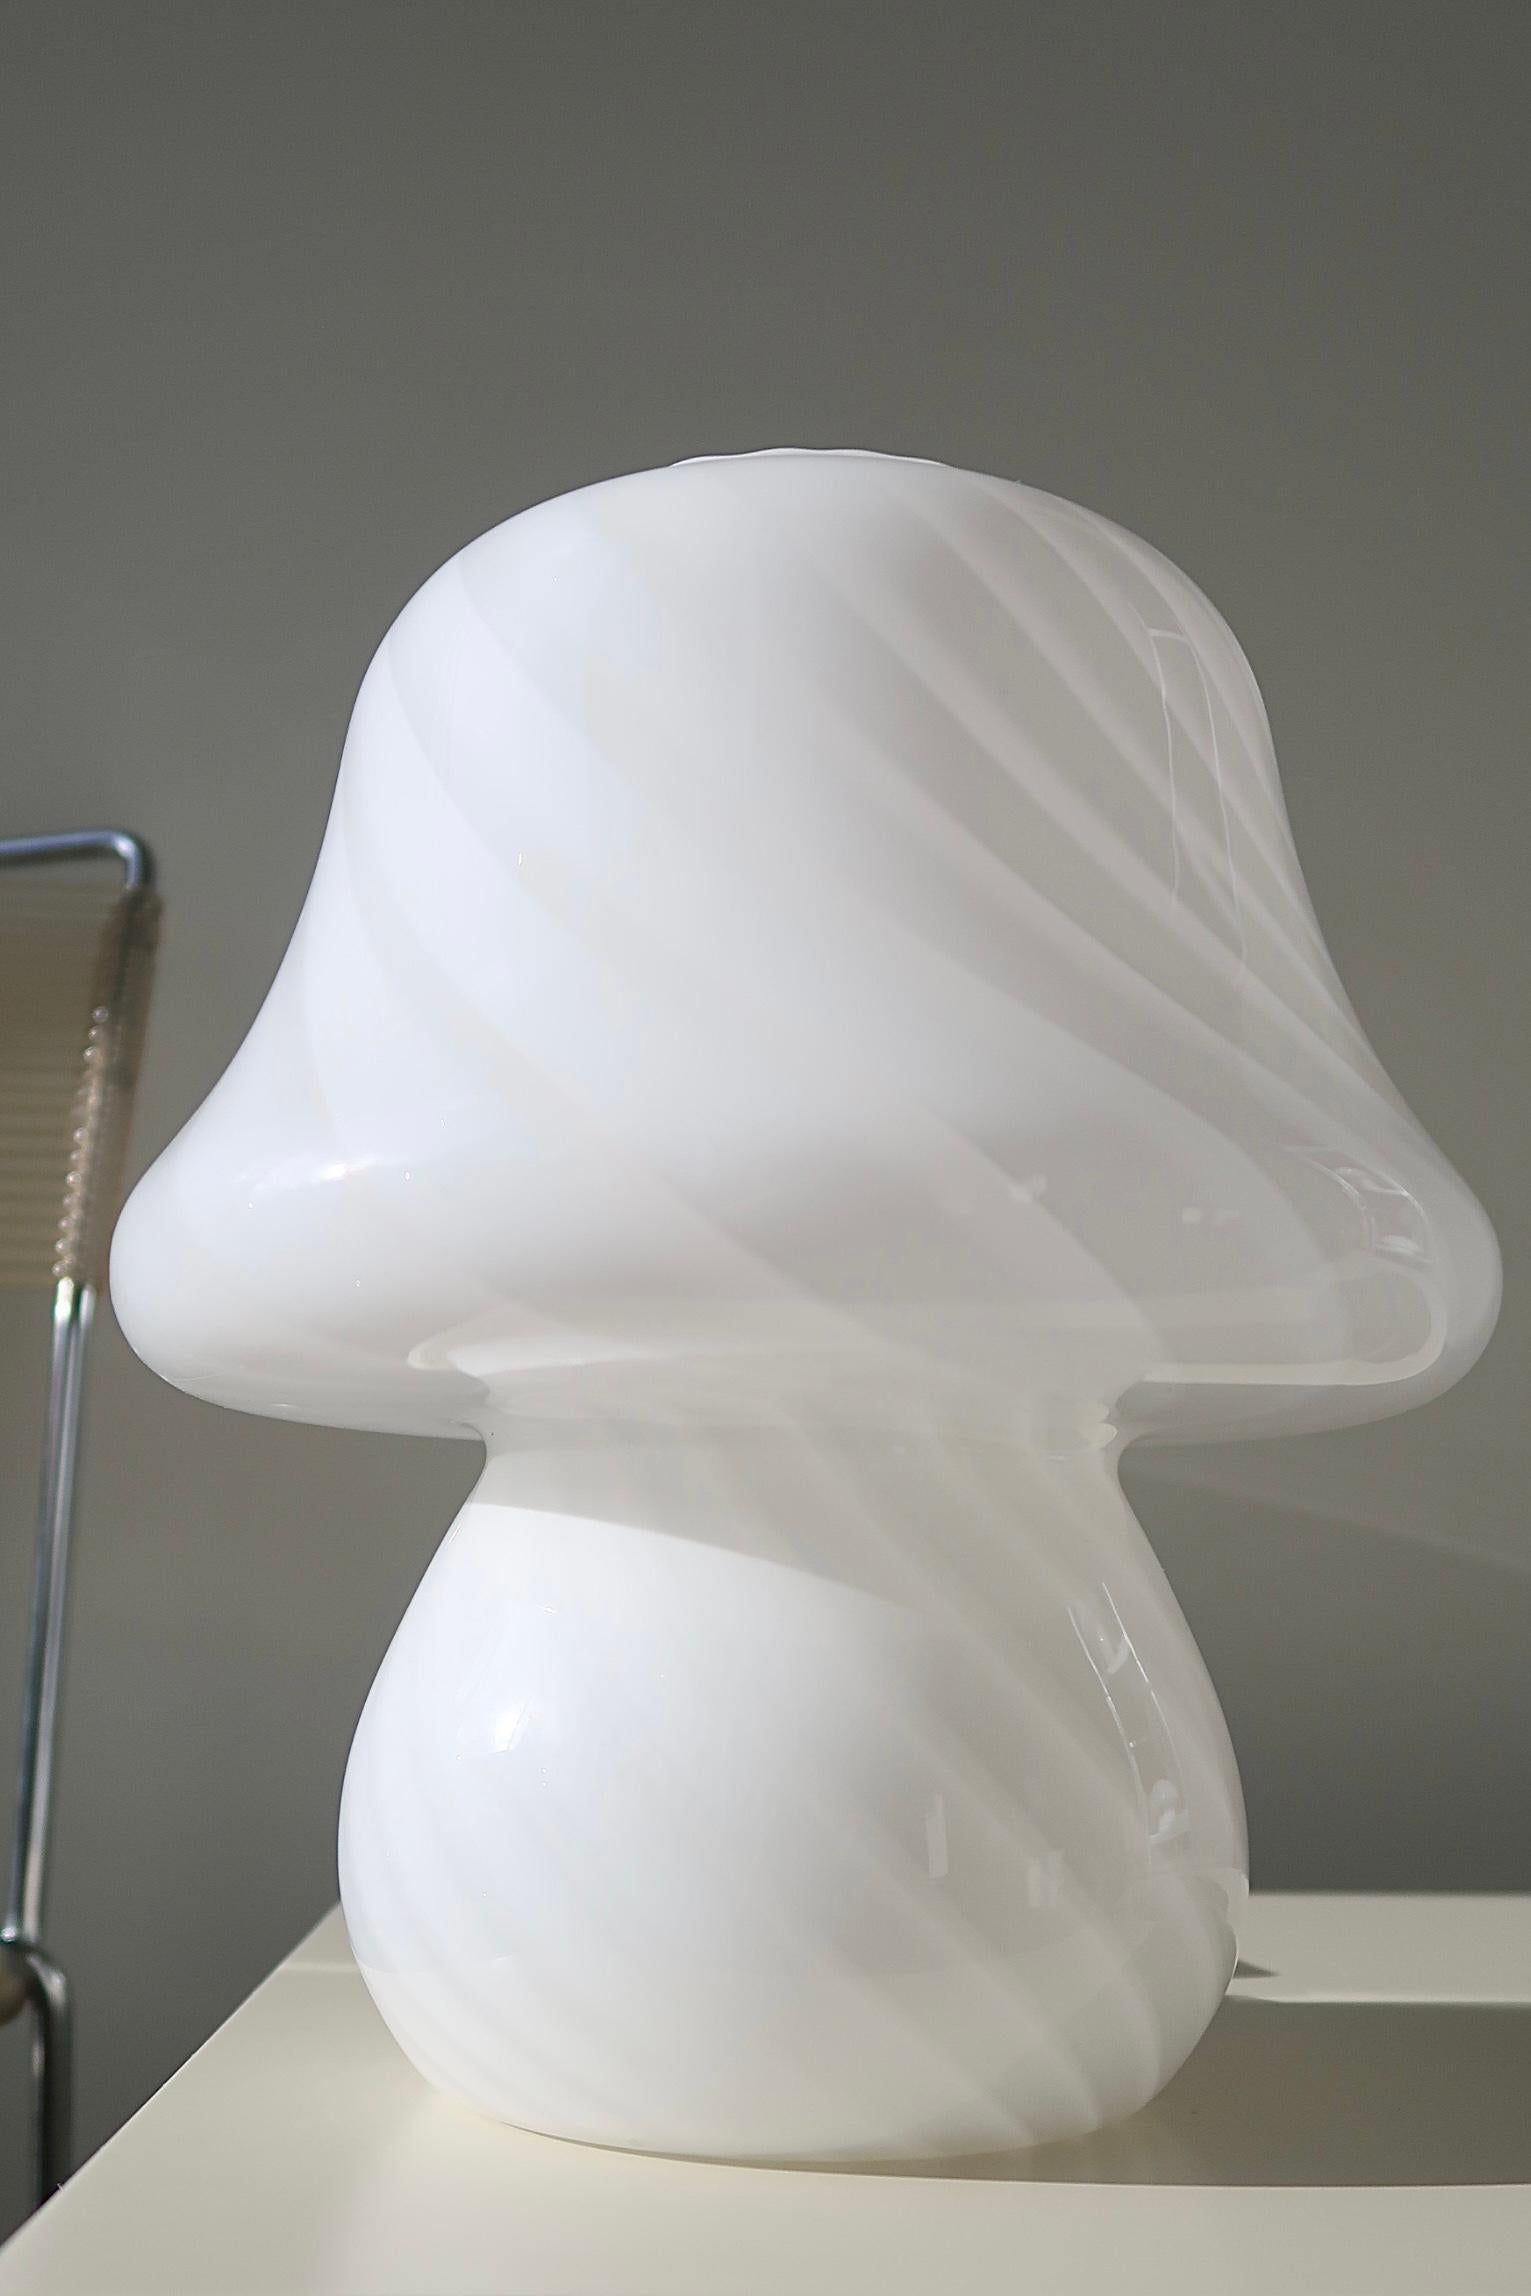 Beautiful vintage Murano mushroom lamp in medium size. Perfectly balanced shape in mouth-blown white glass with swirl pattern. Handmade in Italy, 1960s-1970s, and comes with new white cord. ?

H: 27 cm D: 22 cm.

